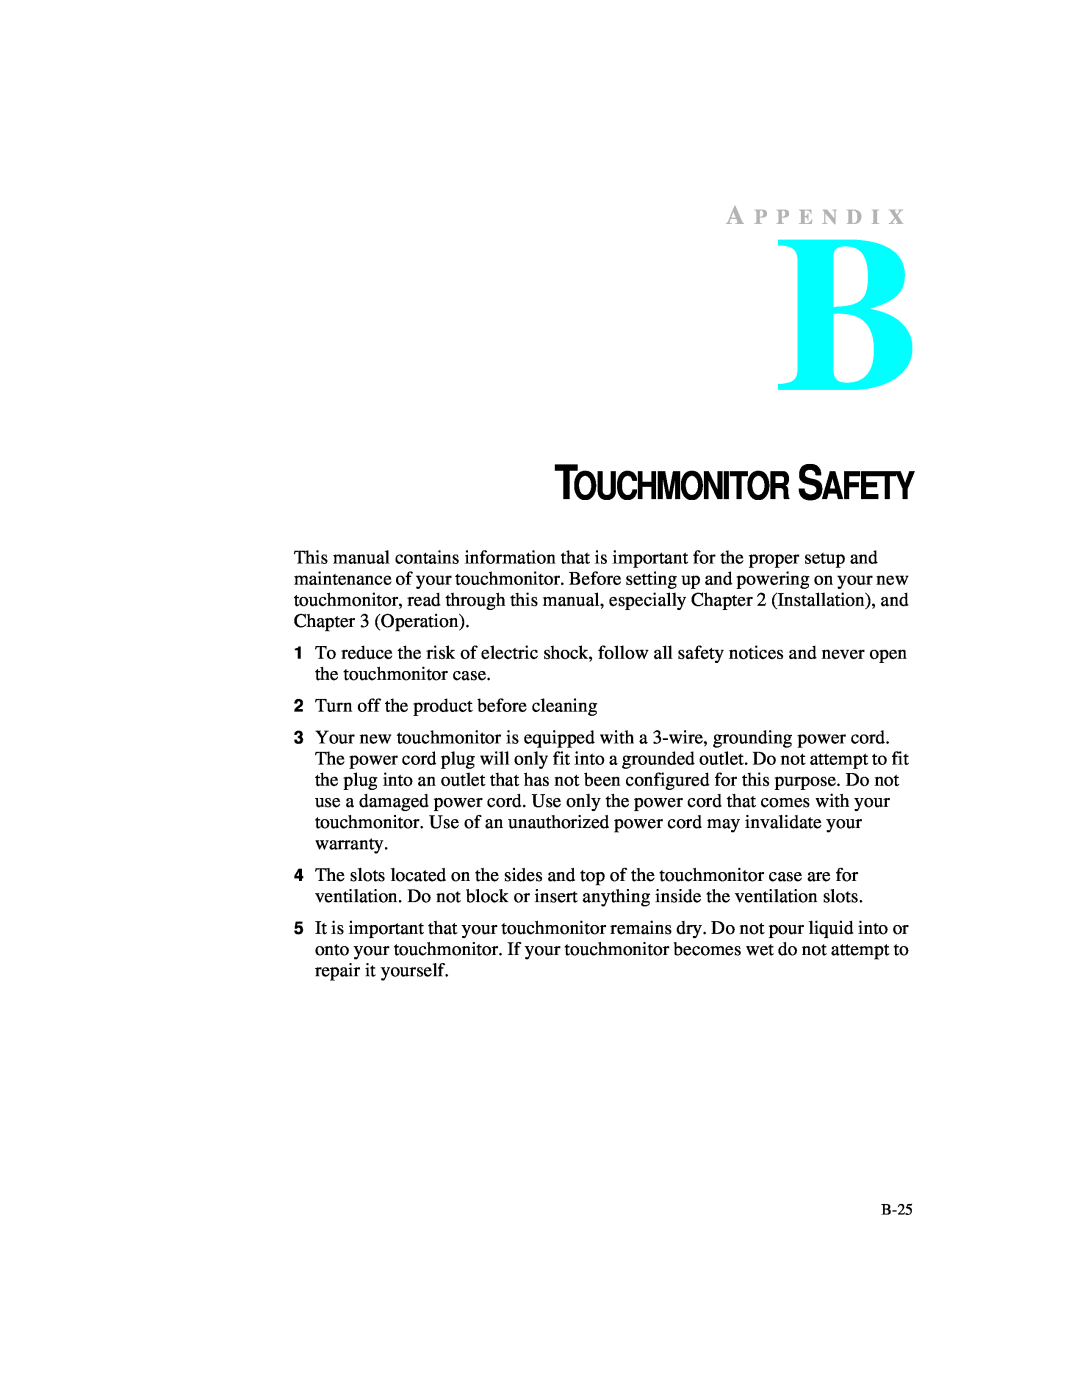 Elo TouchSystems 1524L manual Touchmonitor Safety, A P P E N D I 